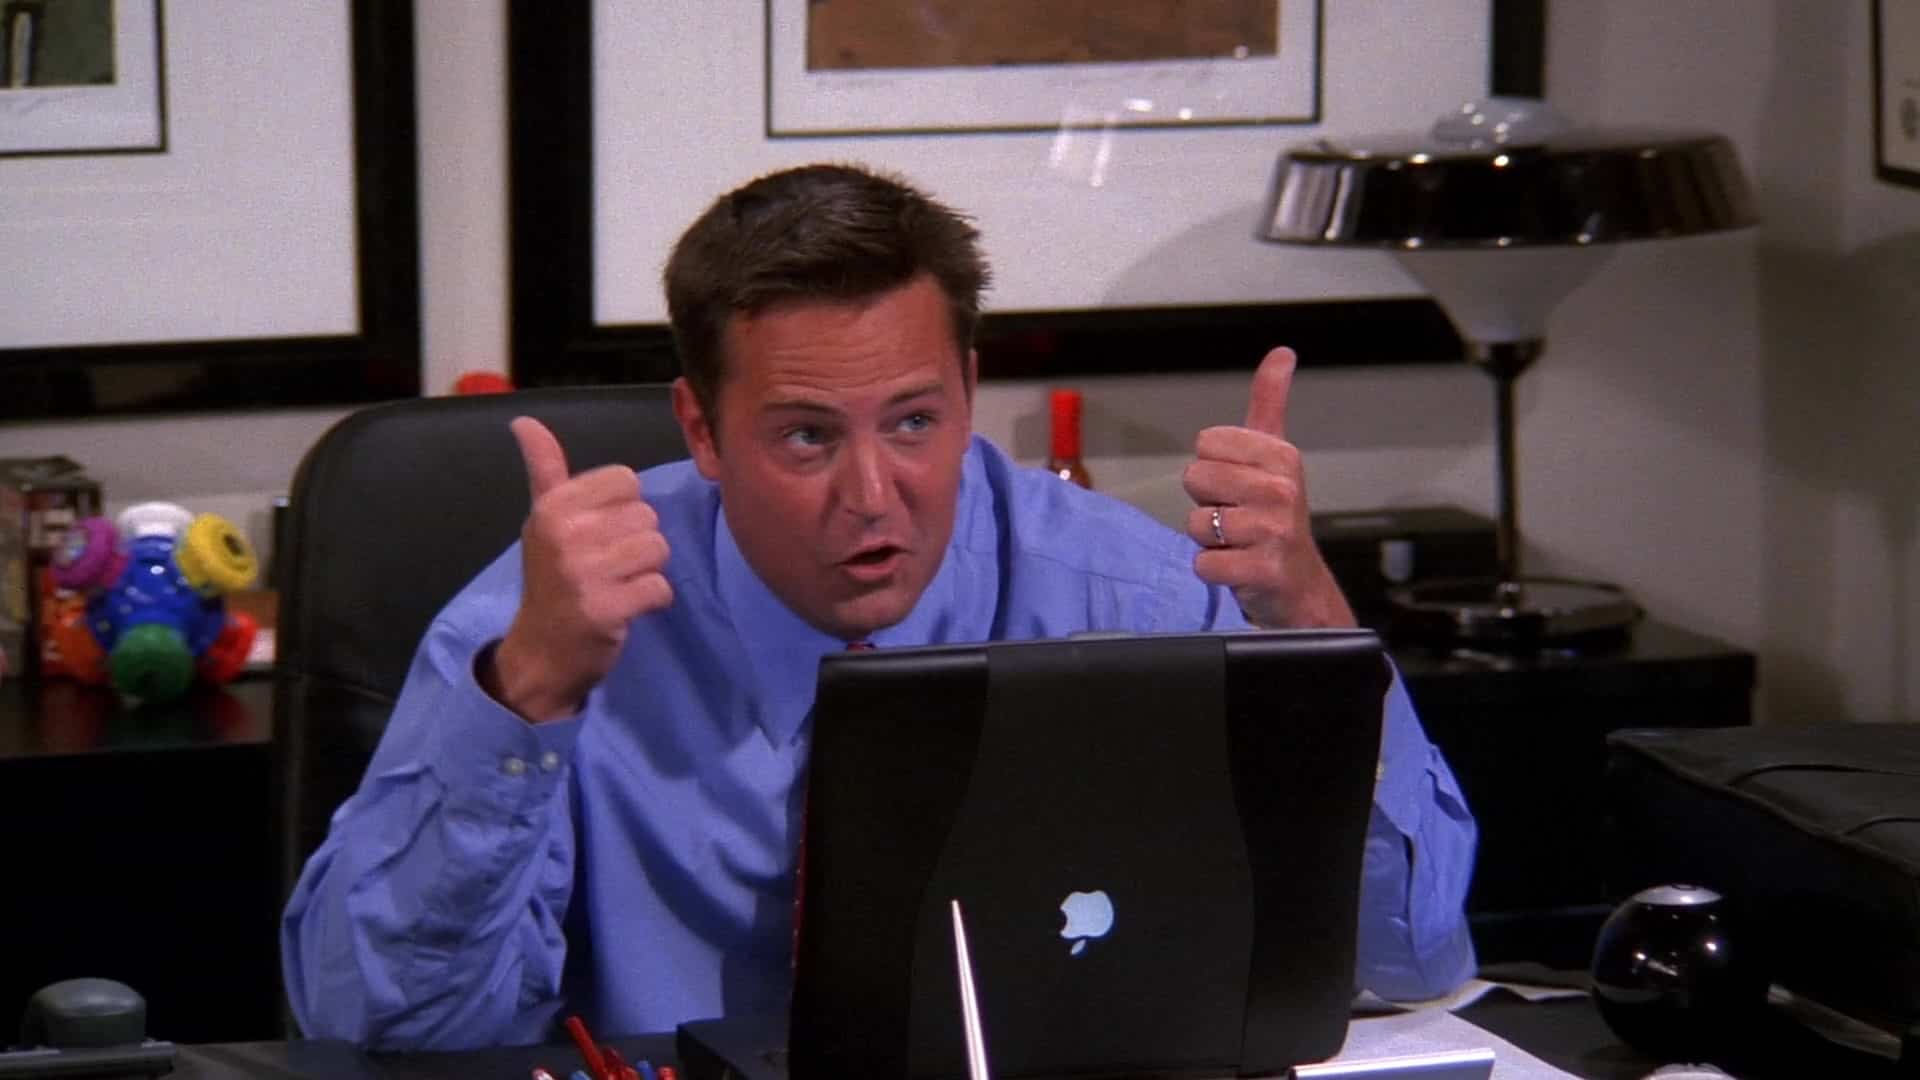 chandler at work with his laptop